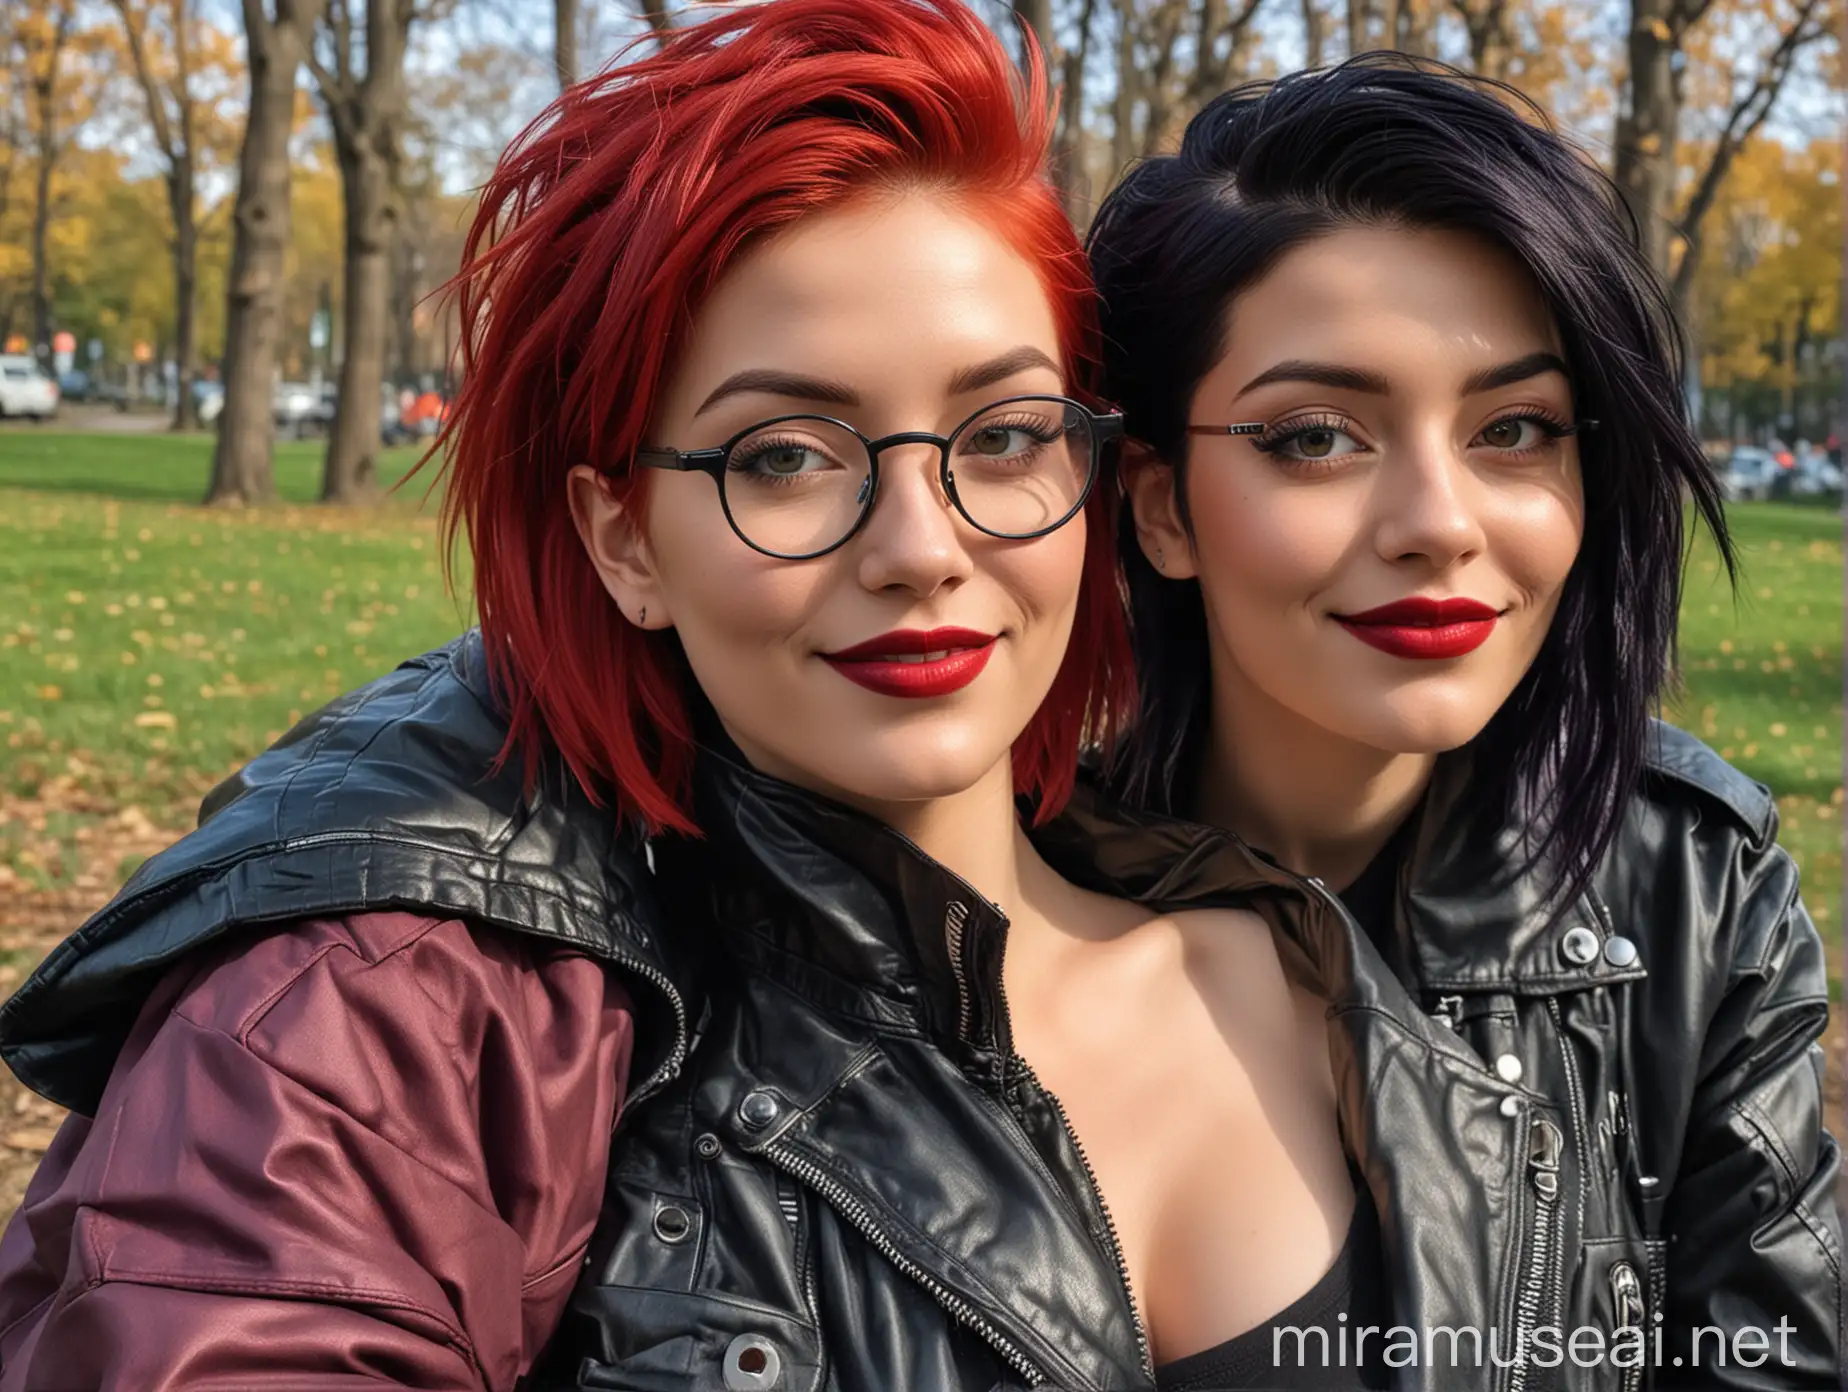 Smiling Women with Scarlet Red and Black Hair in Cyberpunk Jackets